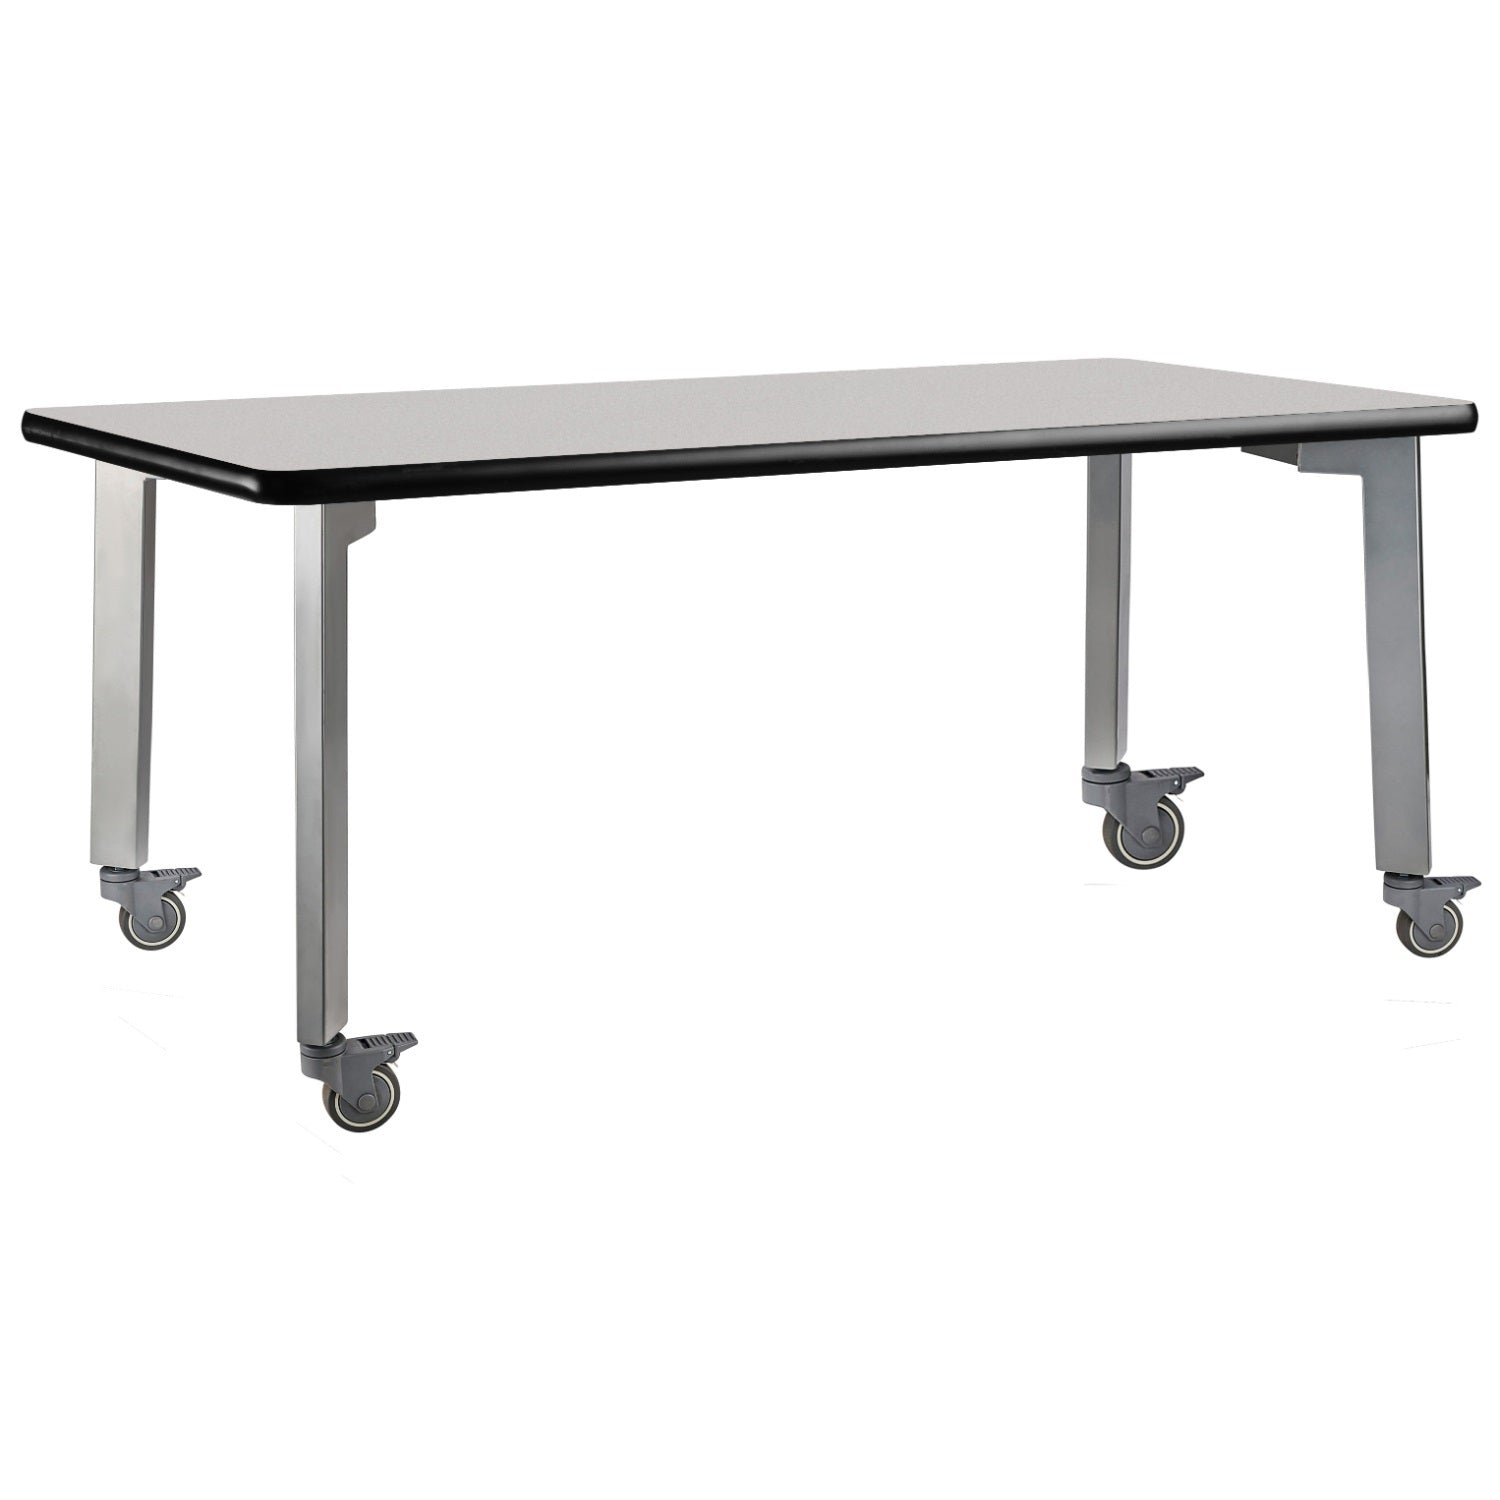 Titan Mobile Table, 24" x 84", Supreme High Pressure Laminate Top with MDF Core and ProtectEdge